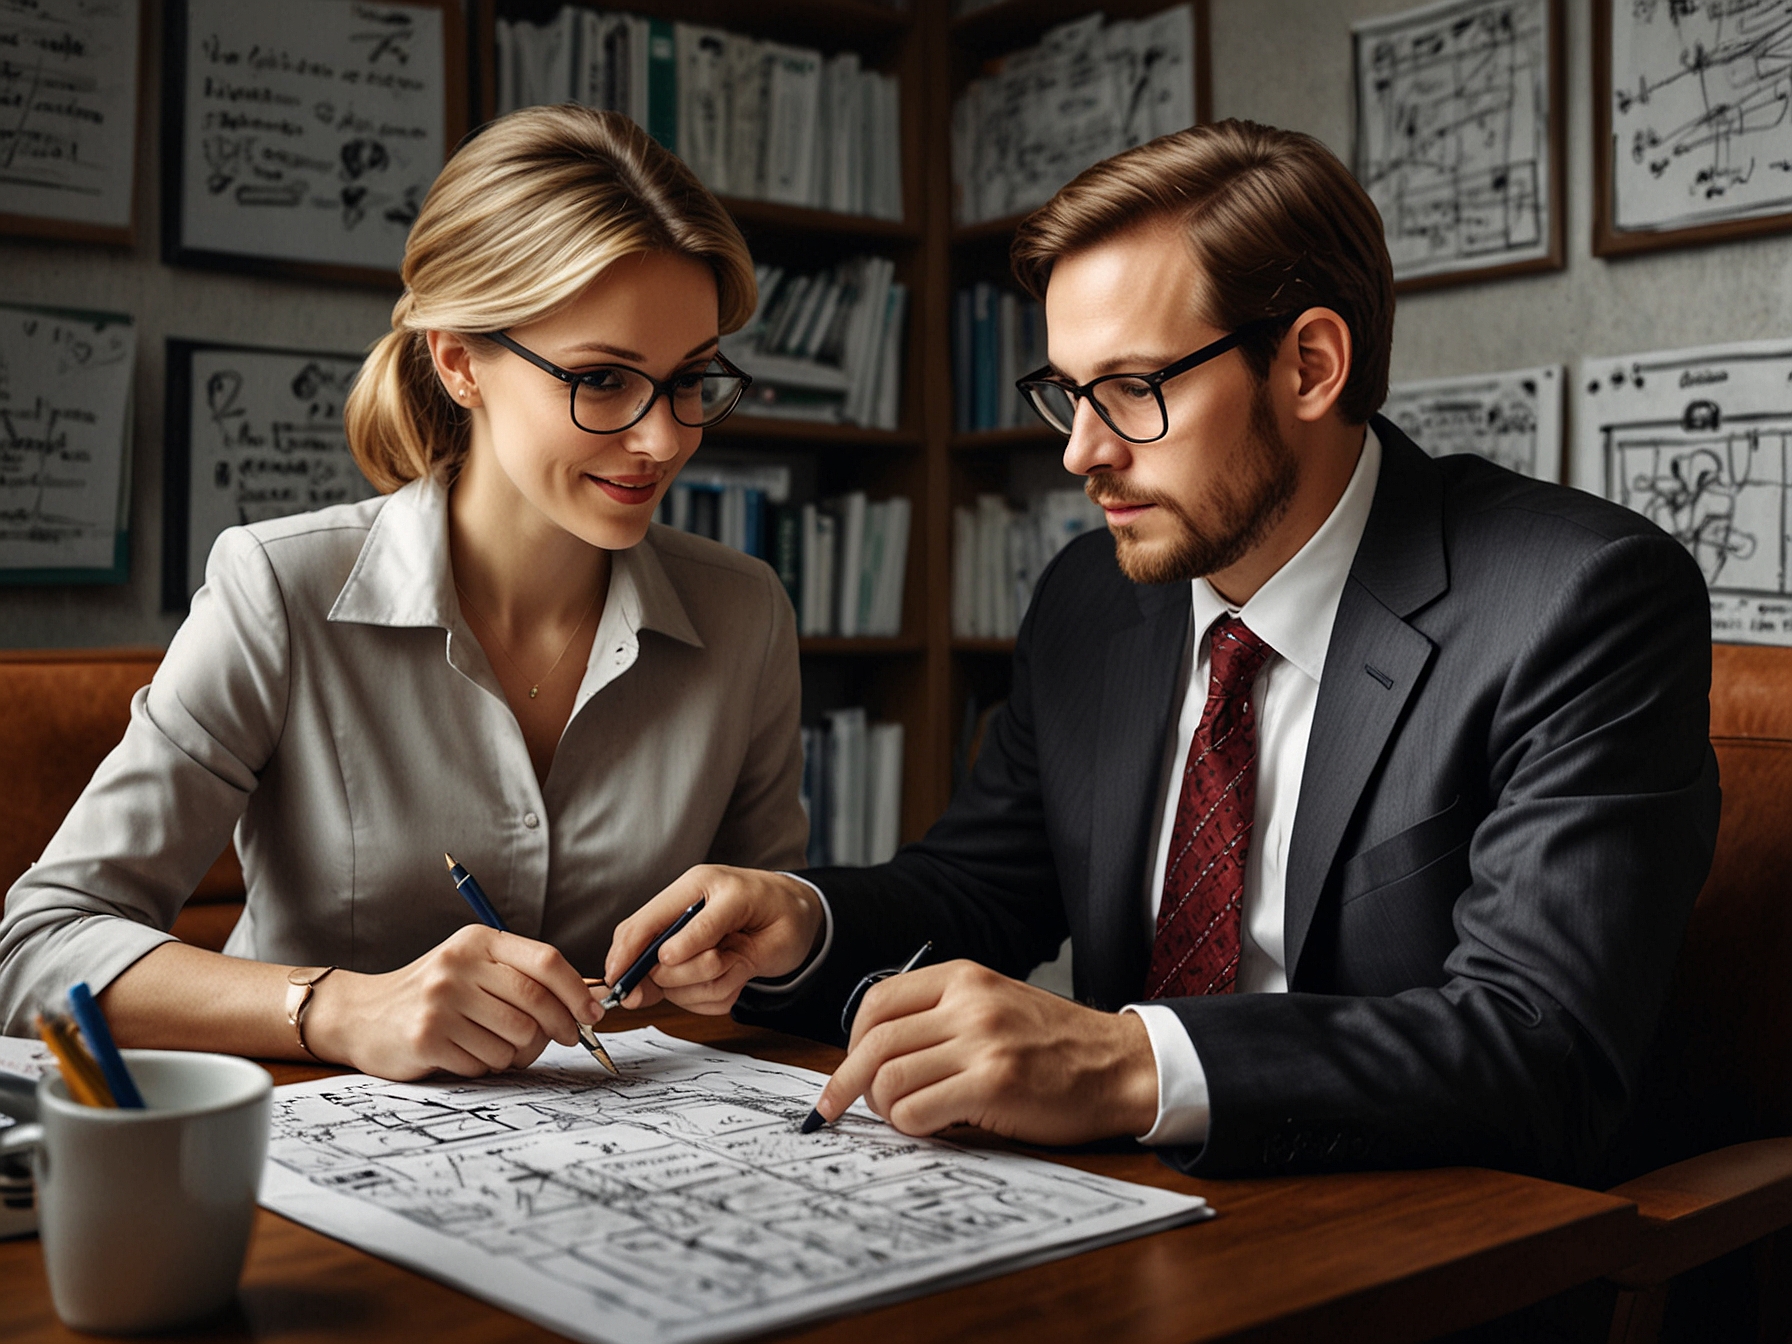 A tax consultant discussing tax brackets and deductions with a client, emphasizing the benefits of professional help in navigating complex tax situations.